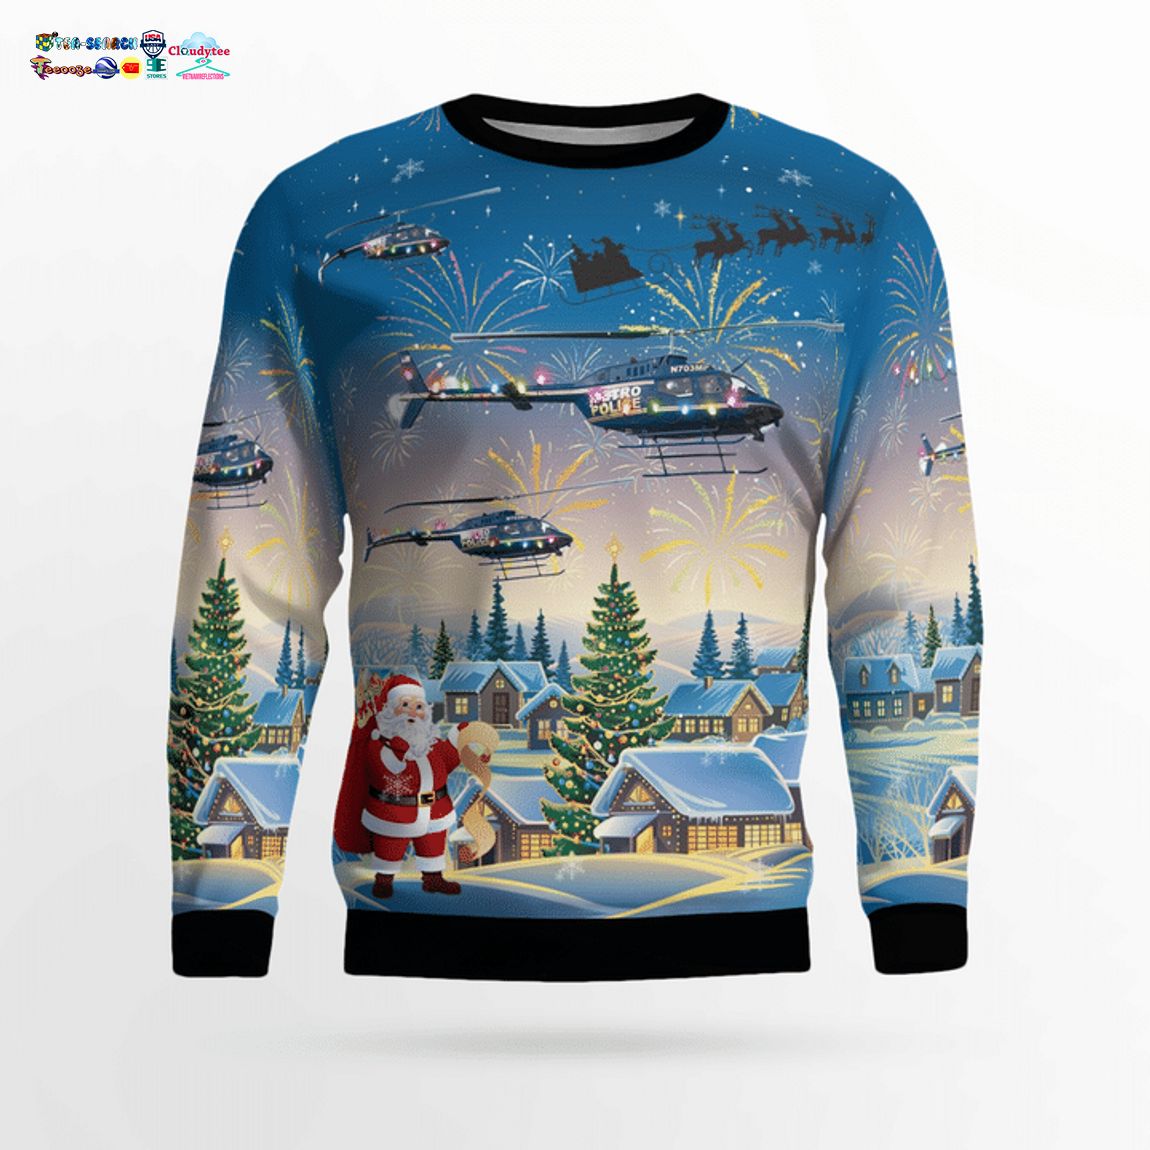 Tennessee Metropolitan Nashville Police Department OH-58 Kiowa Helicopter 3D Christmas Sweater